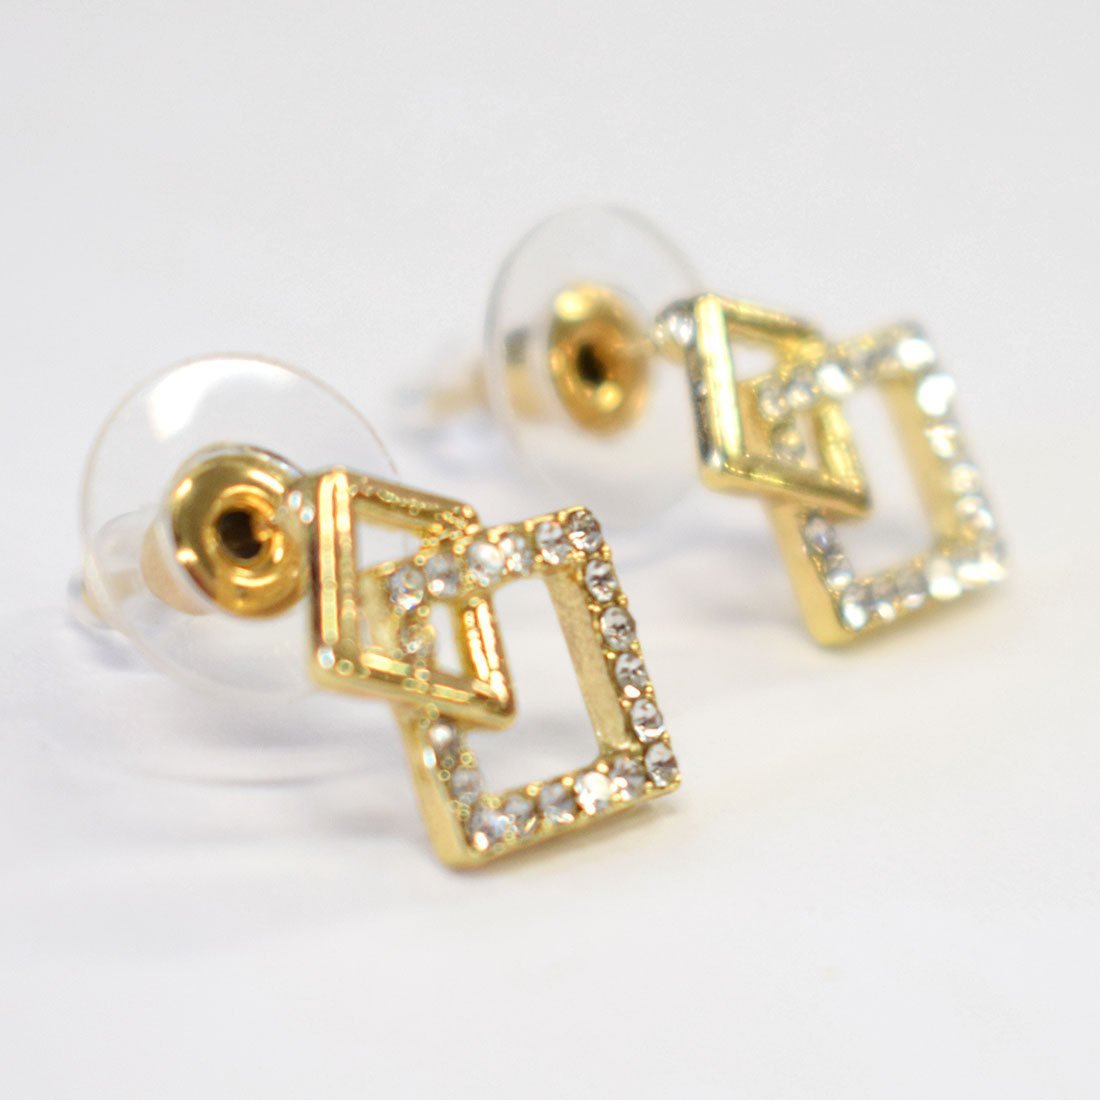  earrings square Gold lady's accessory adult pretty lovely stylish memory day birthday wedding Christmas 